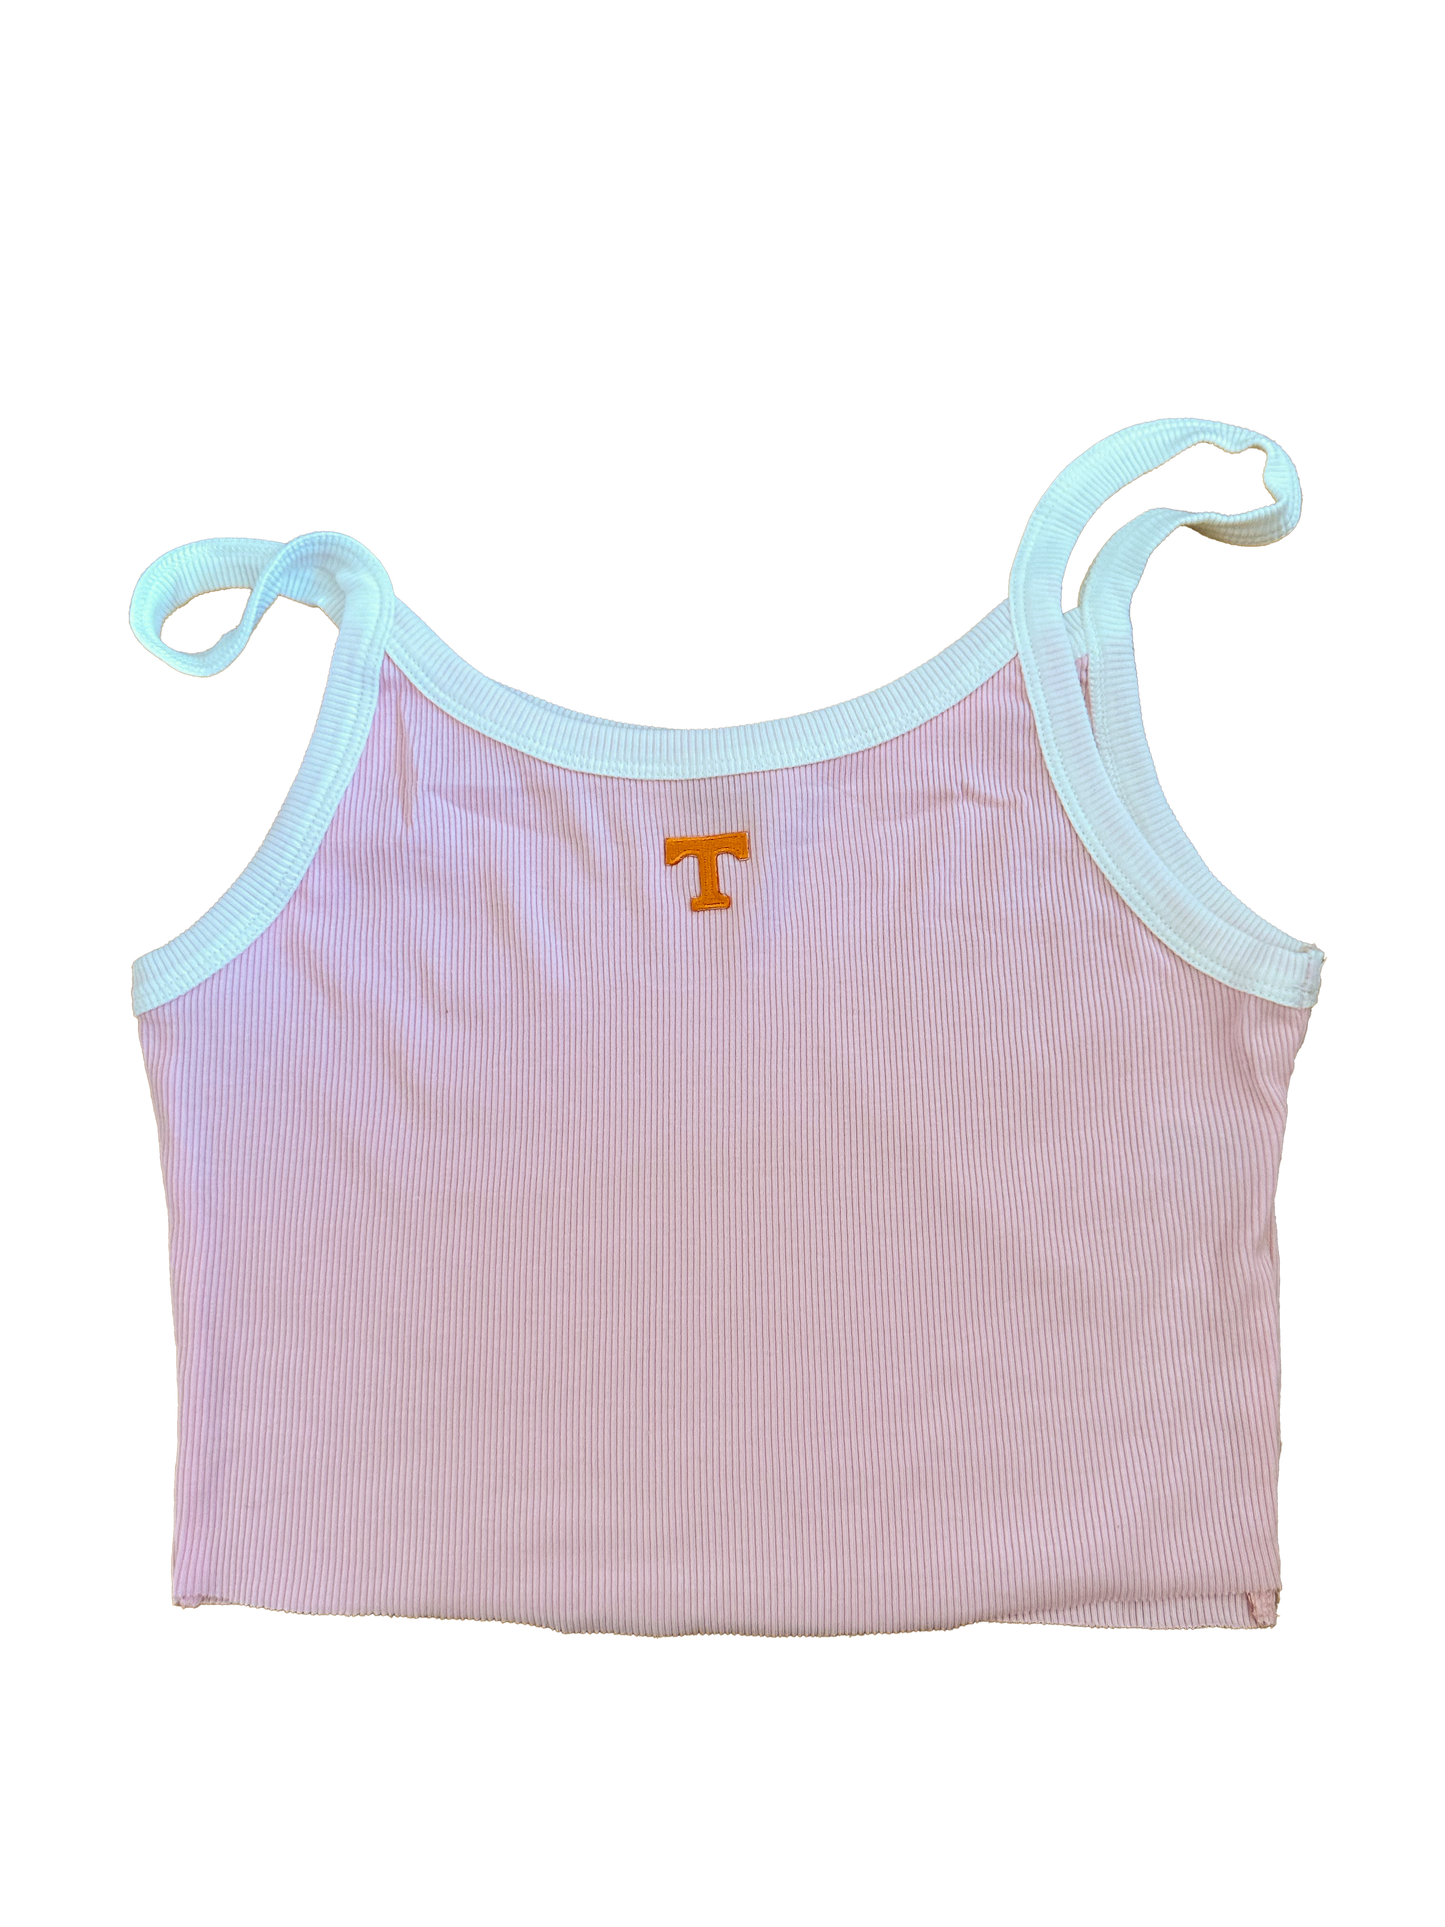 Tennessee Baby Pink Contrast Tank